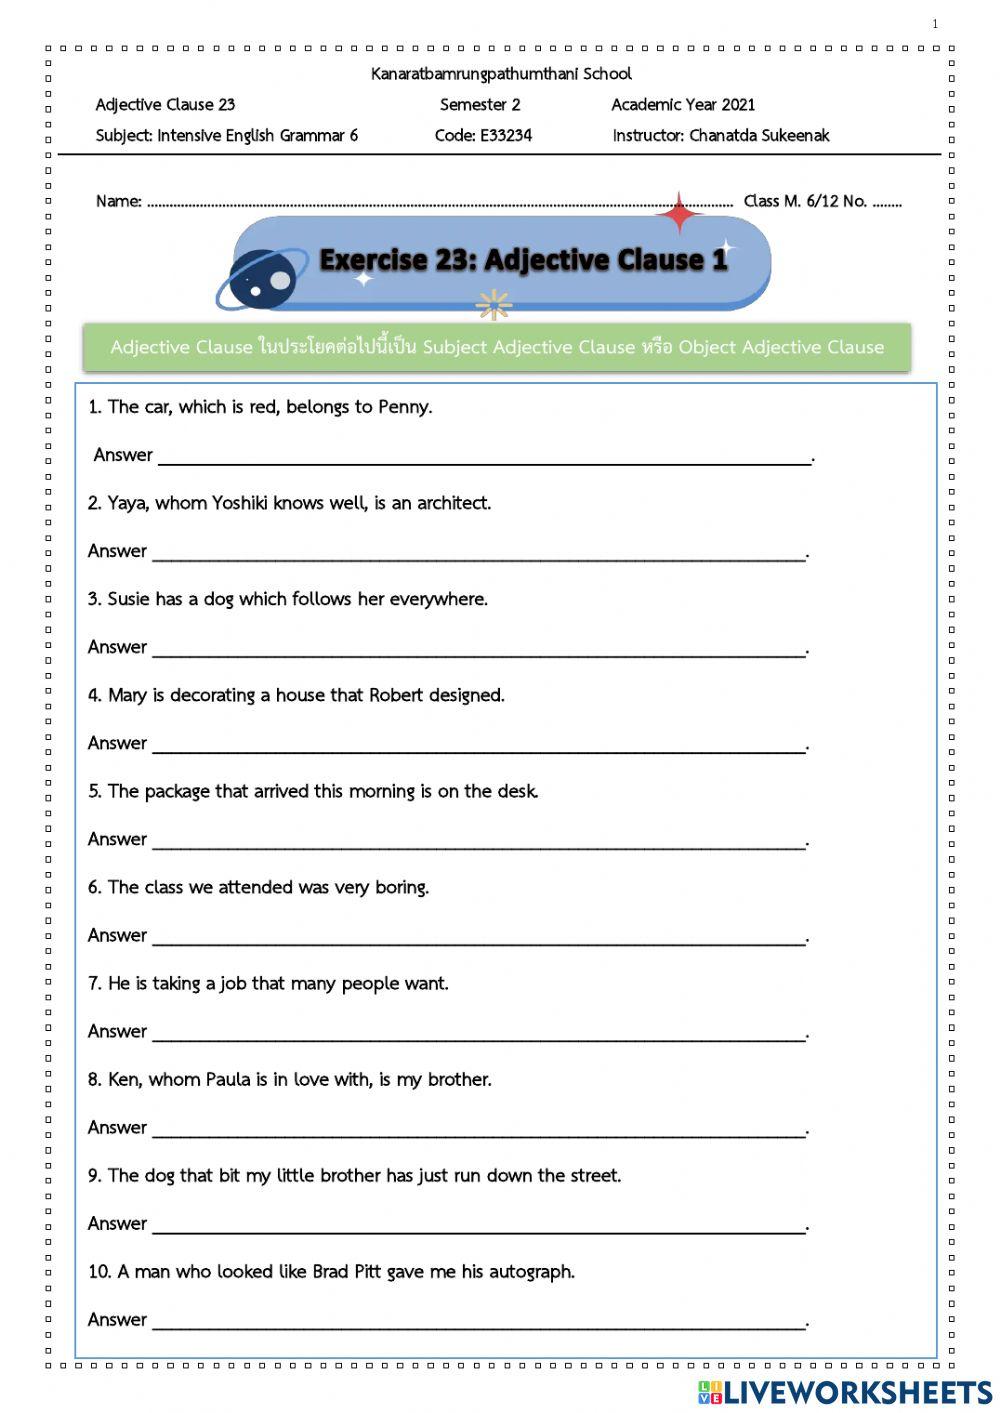 Exercise 23: Adjective Clause